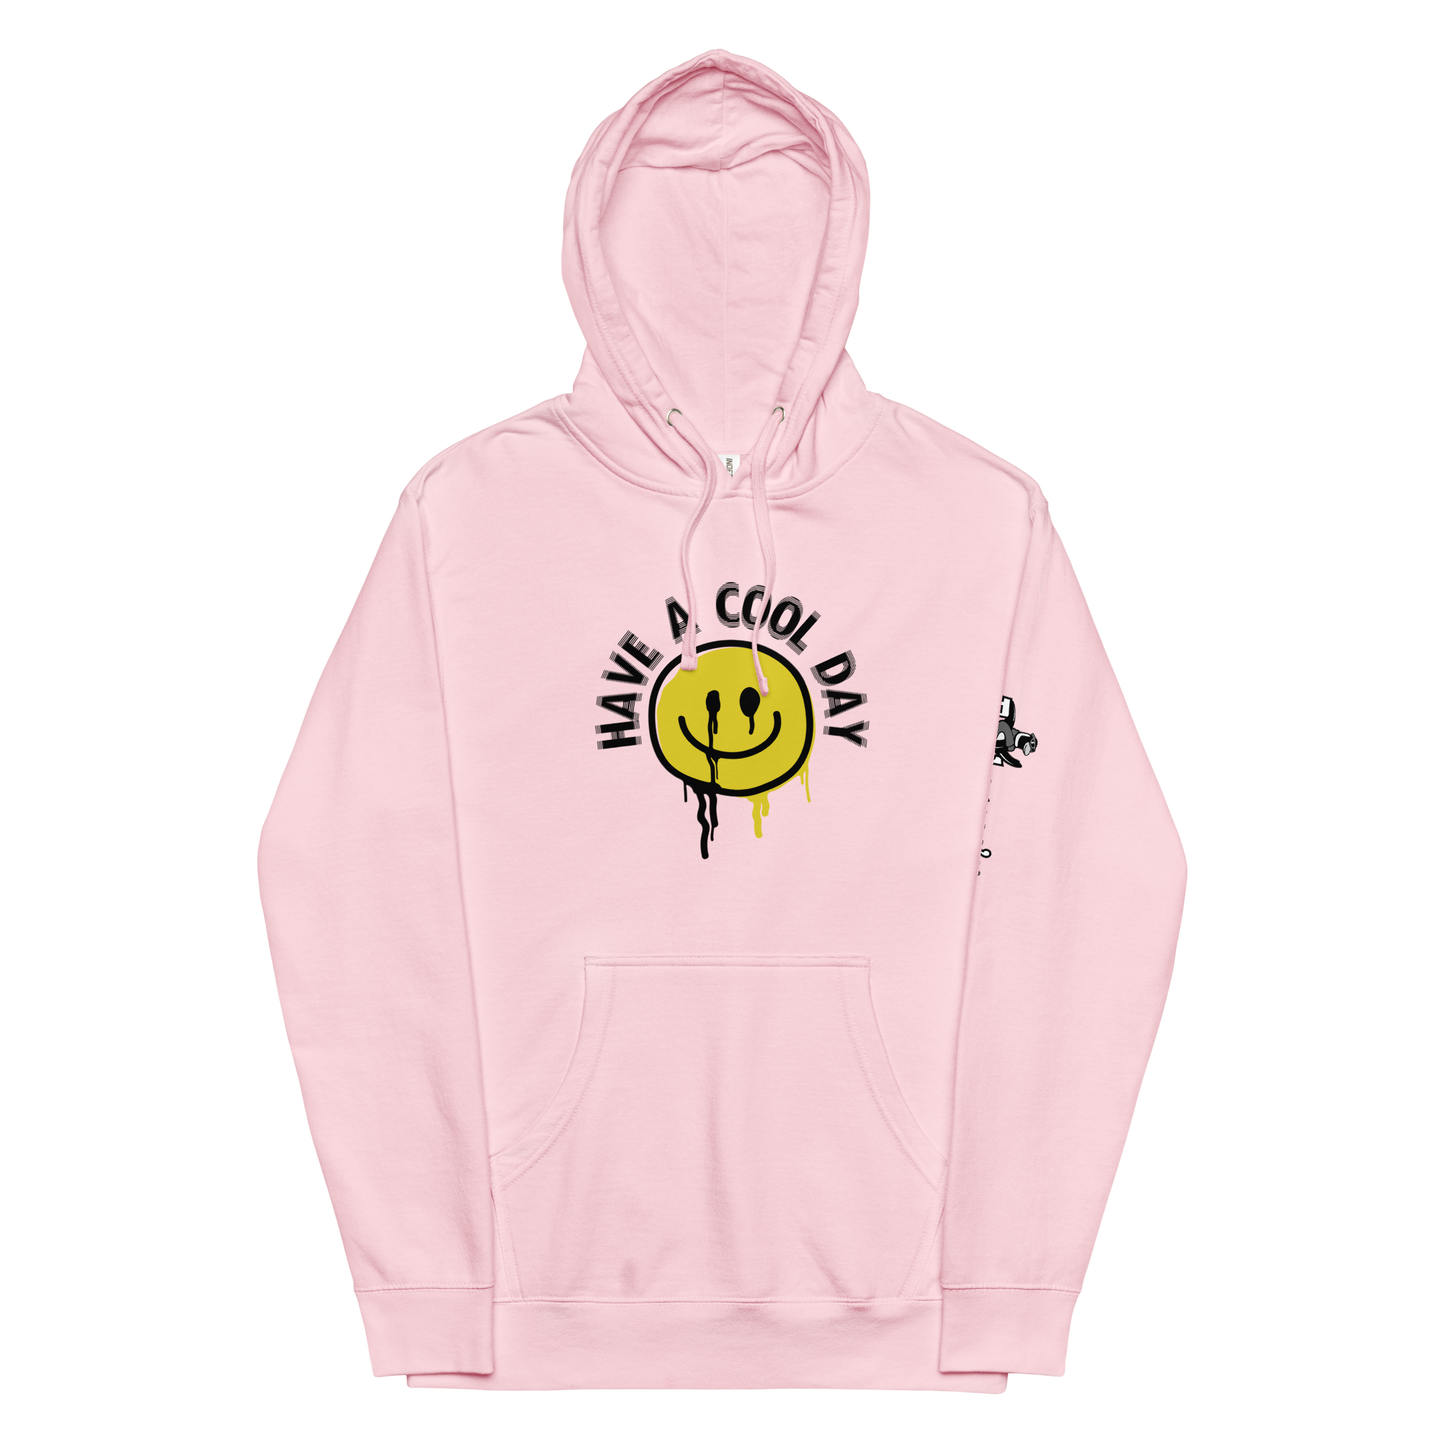 Premium Have A Cool Day Hoodie - Unisex